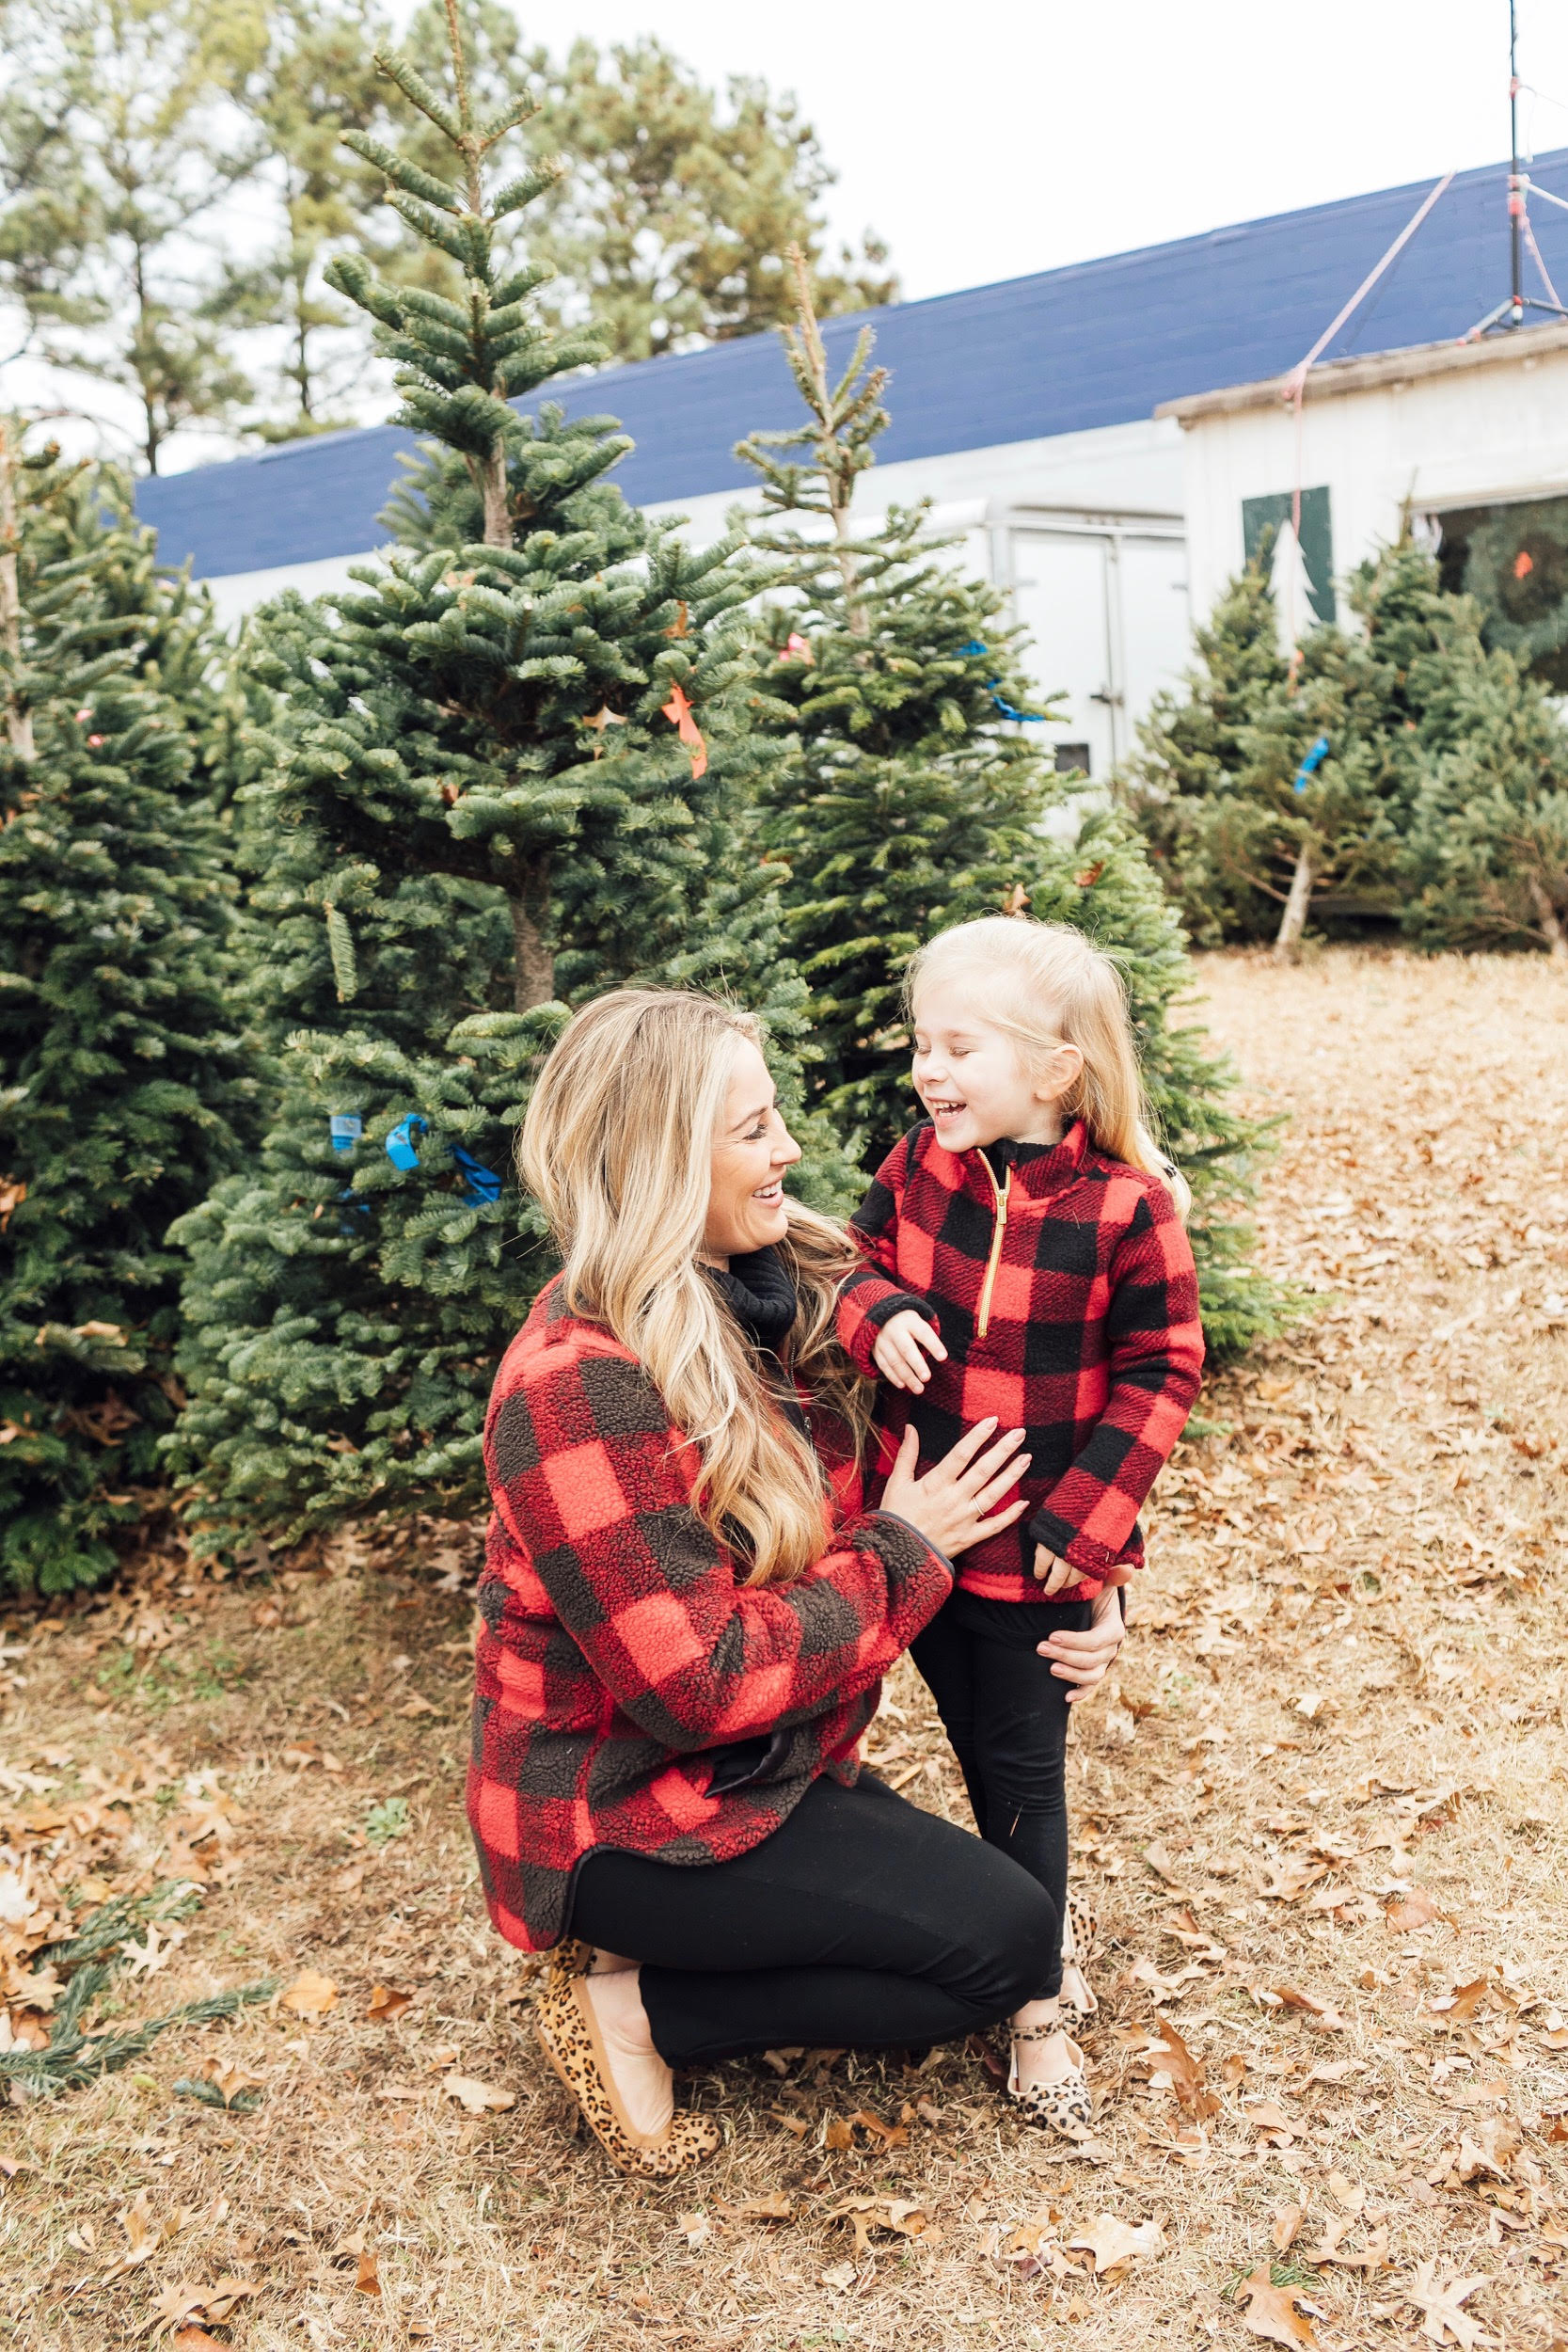 Merry Christmas Wishes featured by top US lifestyle blog, Walking in Memphis in High Heels: image of a mom and daughter wearing red plaid jackets, black jeans and gold shoes